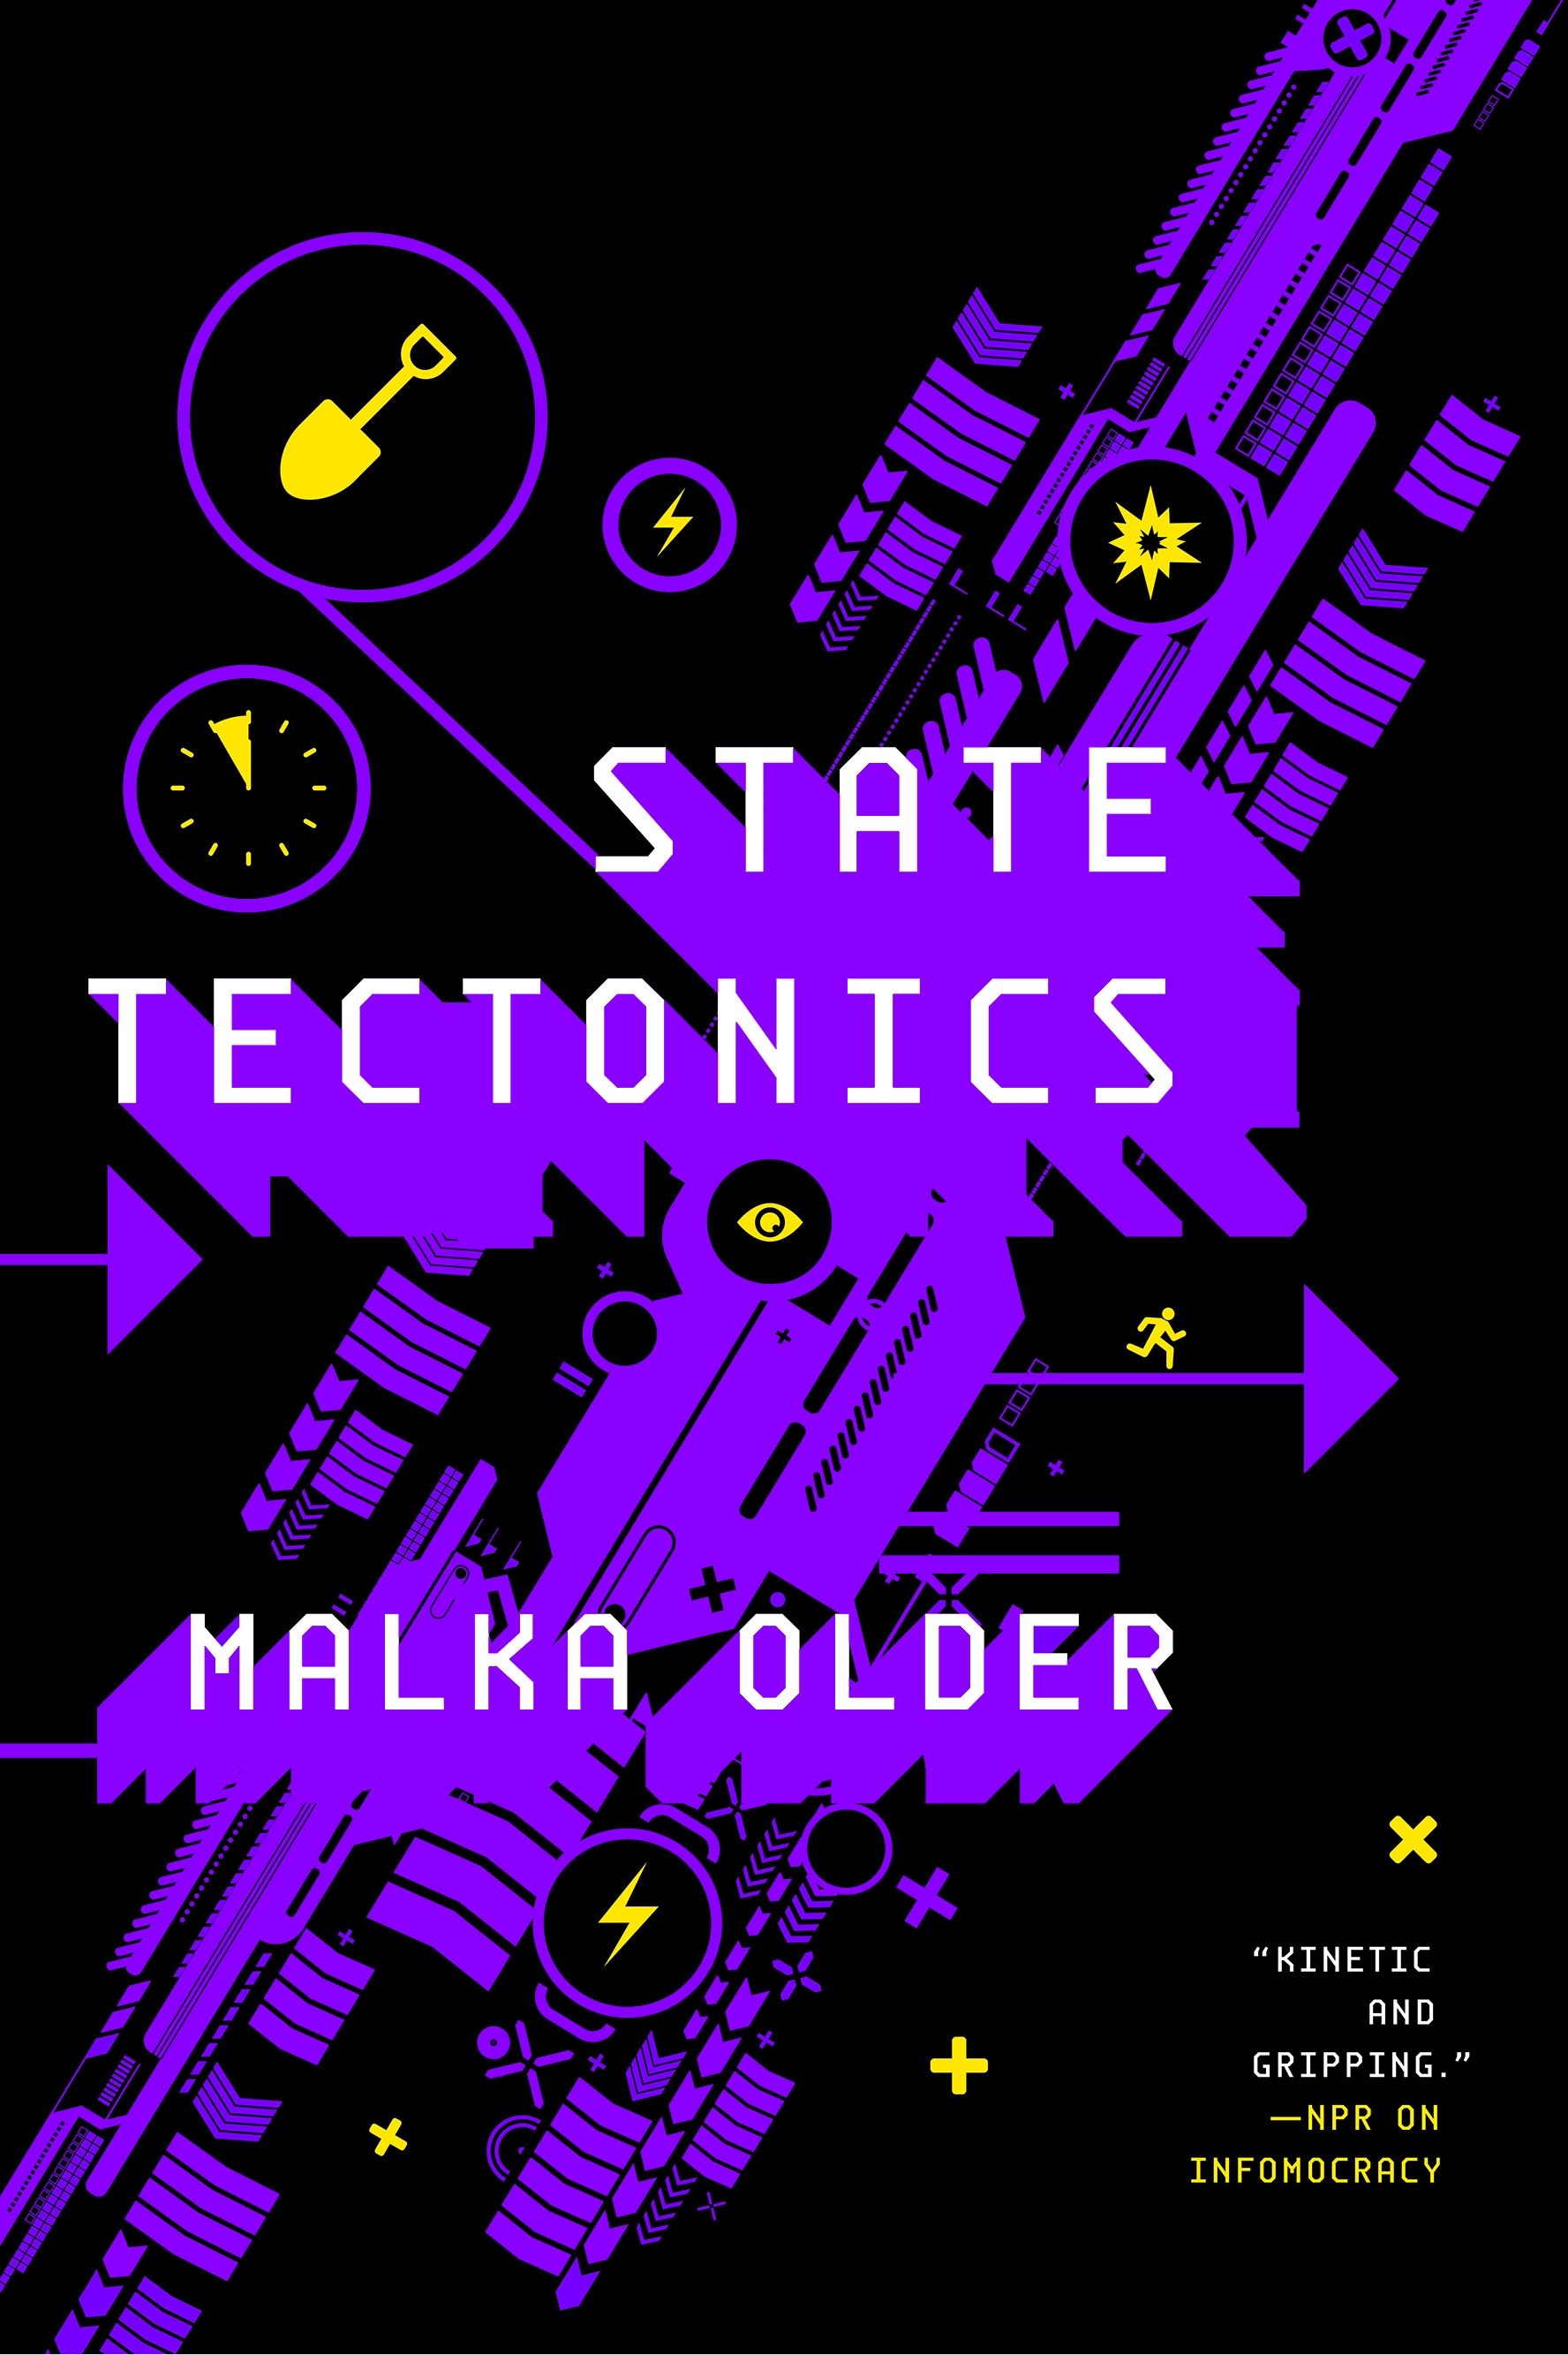 State Tectonics by Malka Older